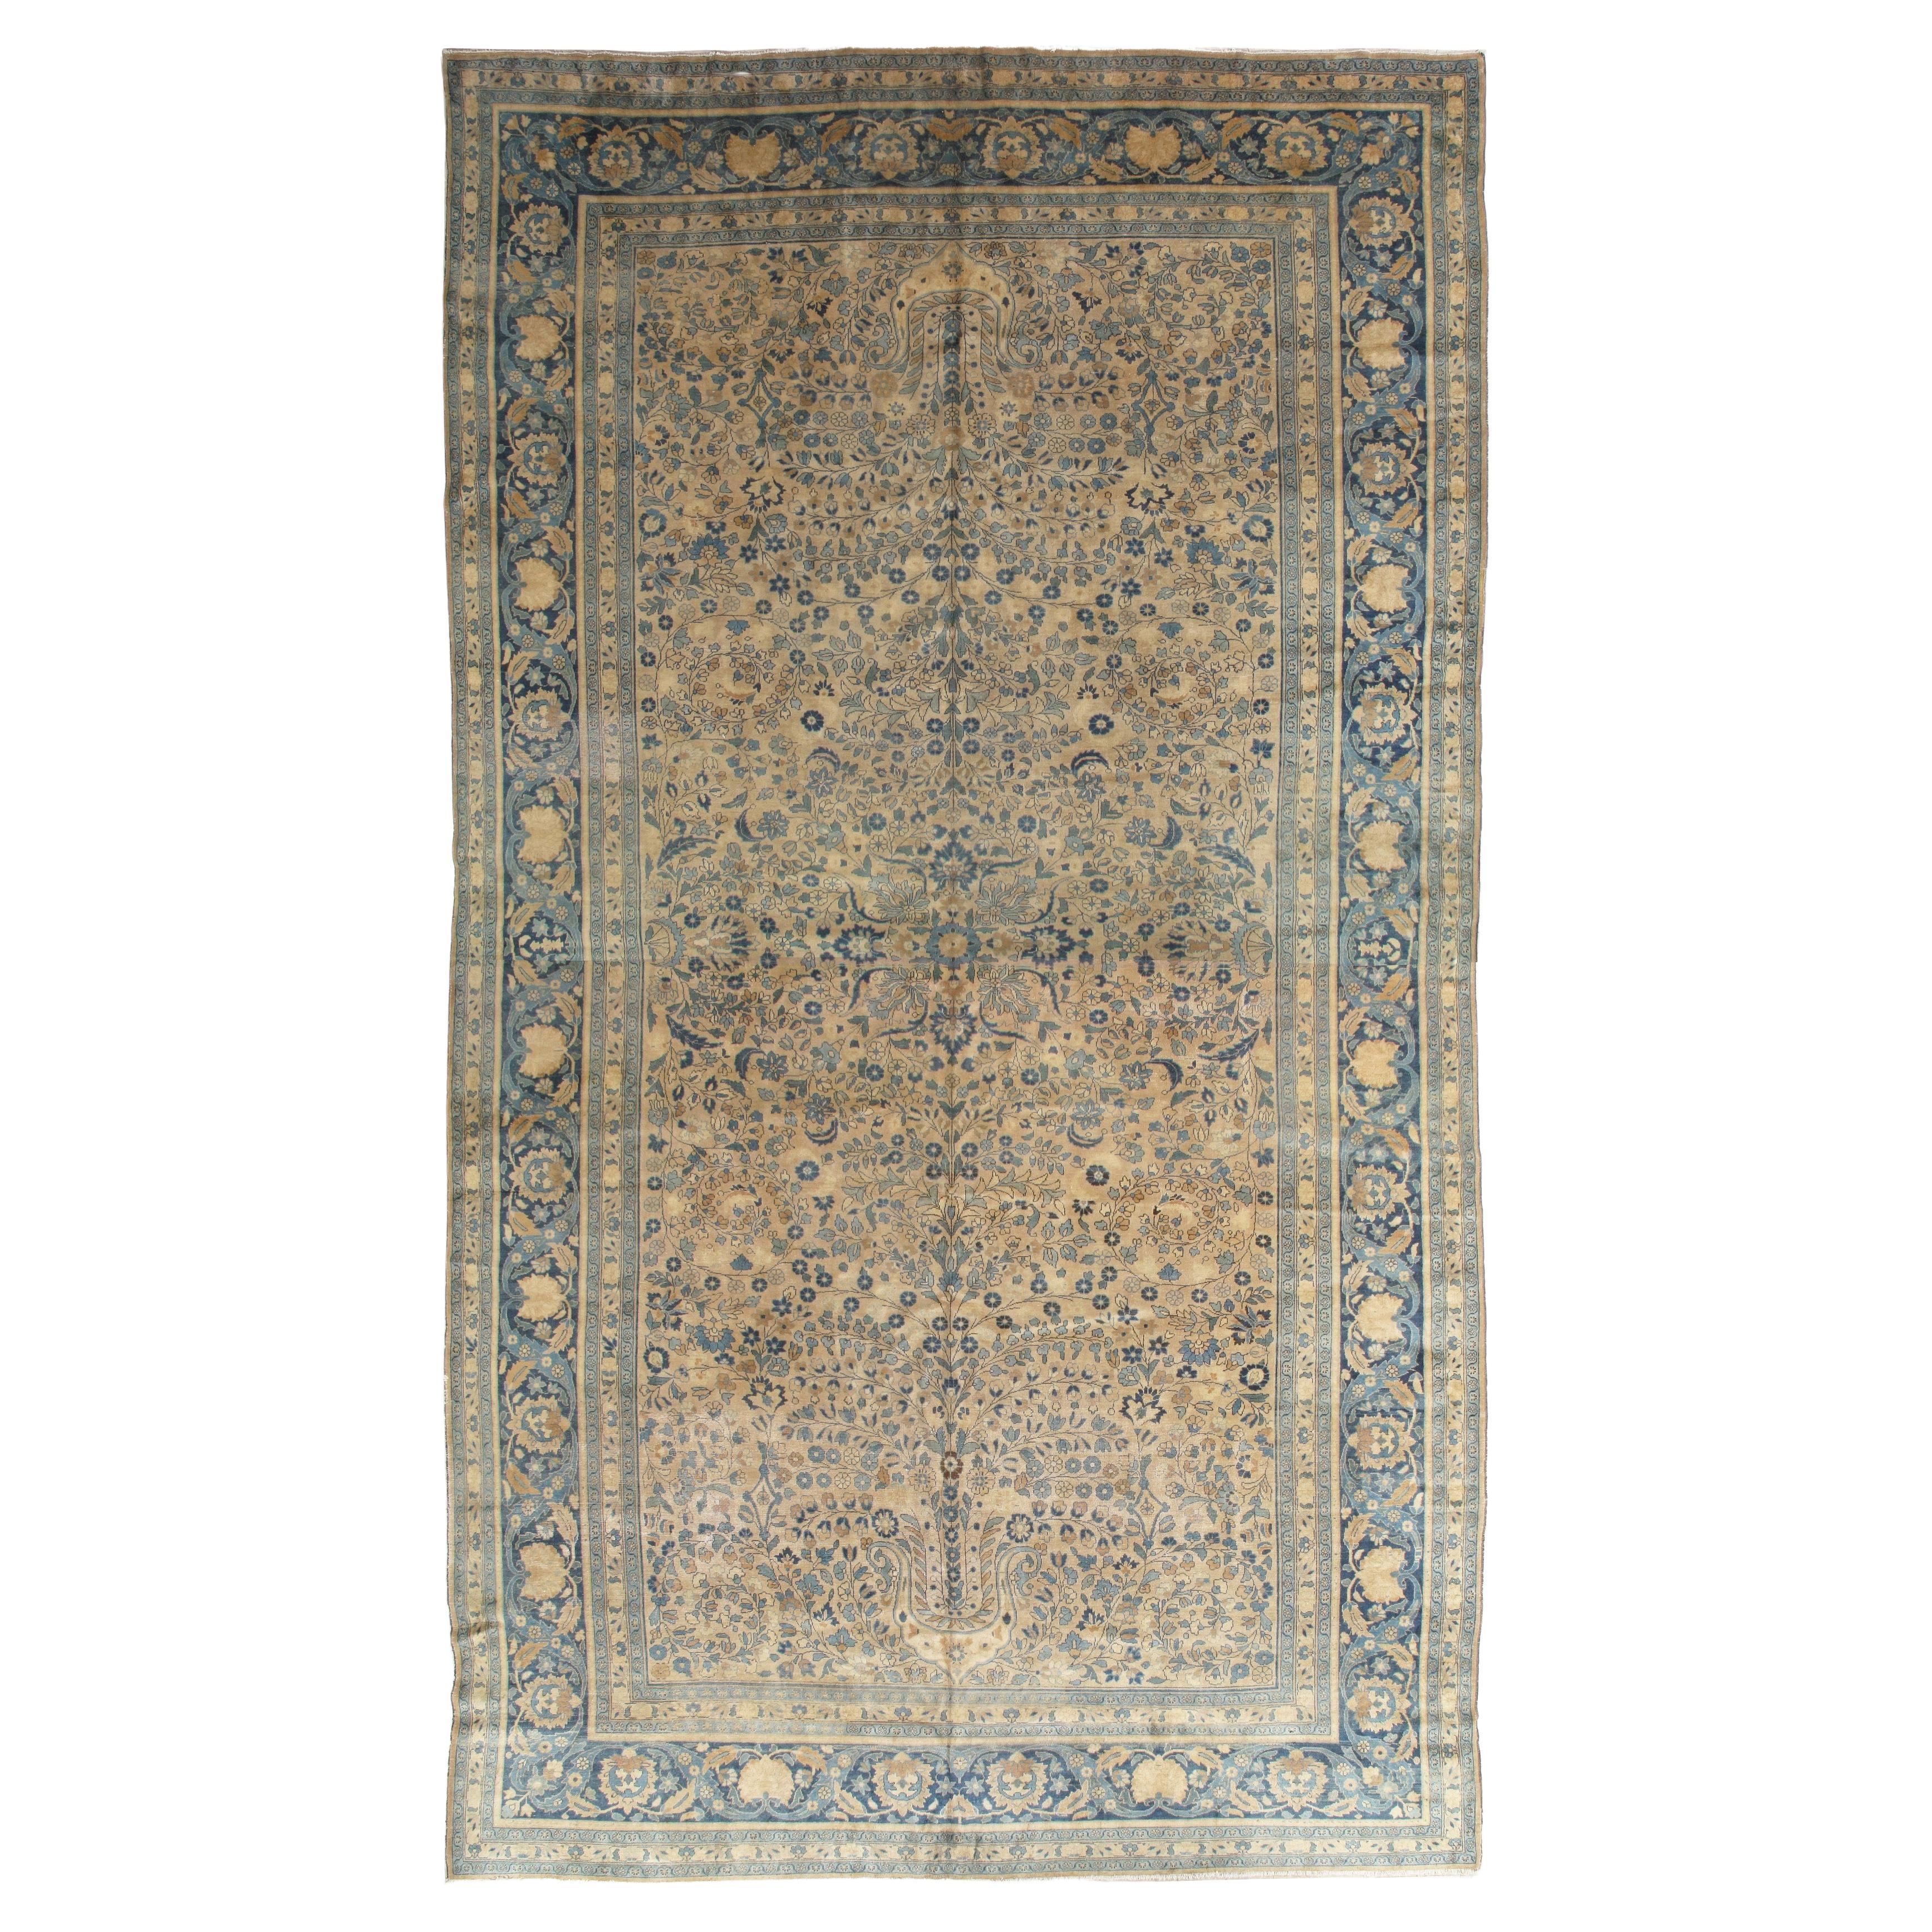 Antique Mashad Persian Carpet, Fine weave, Softs Blues, Beige, Soft Taupe For Sale